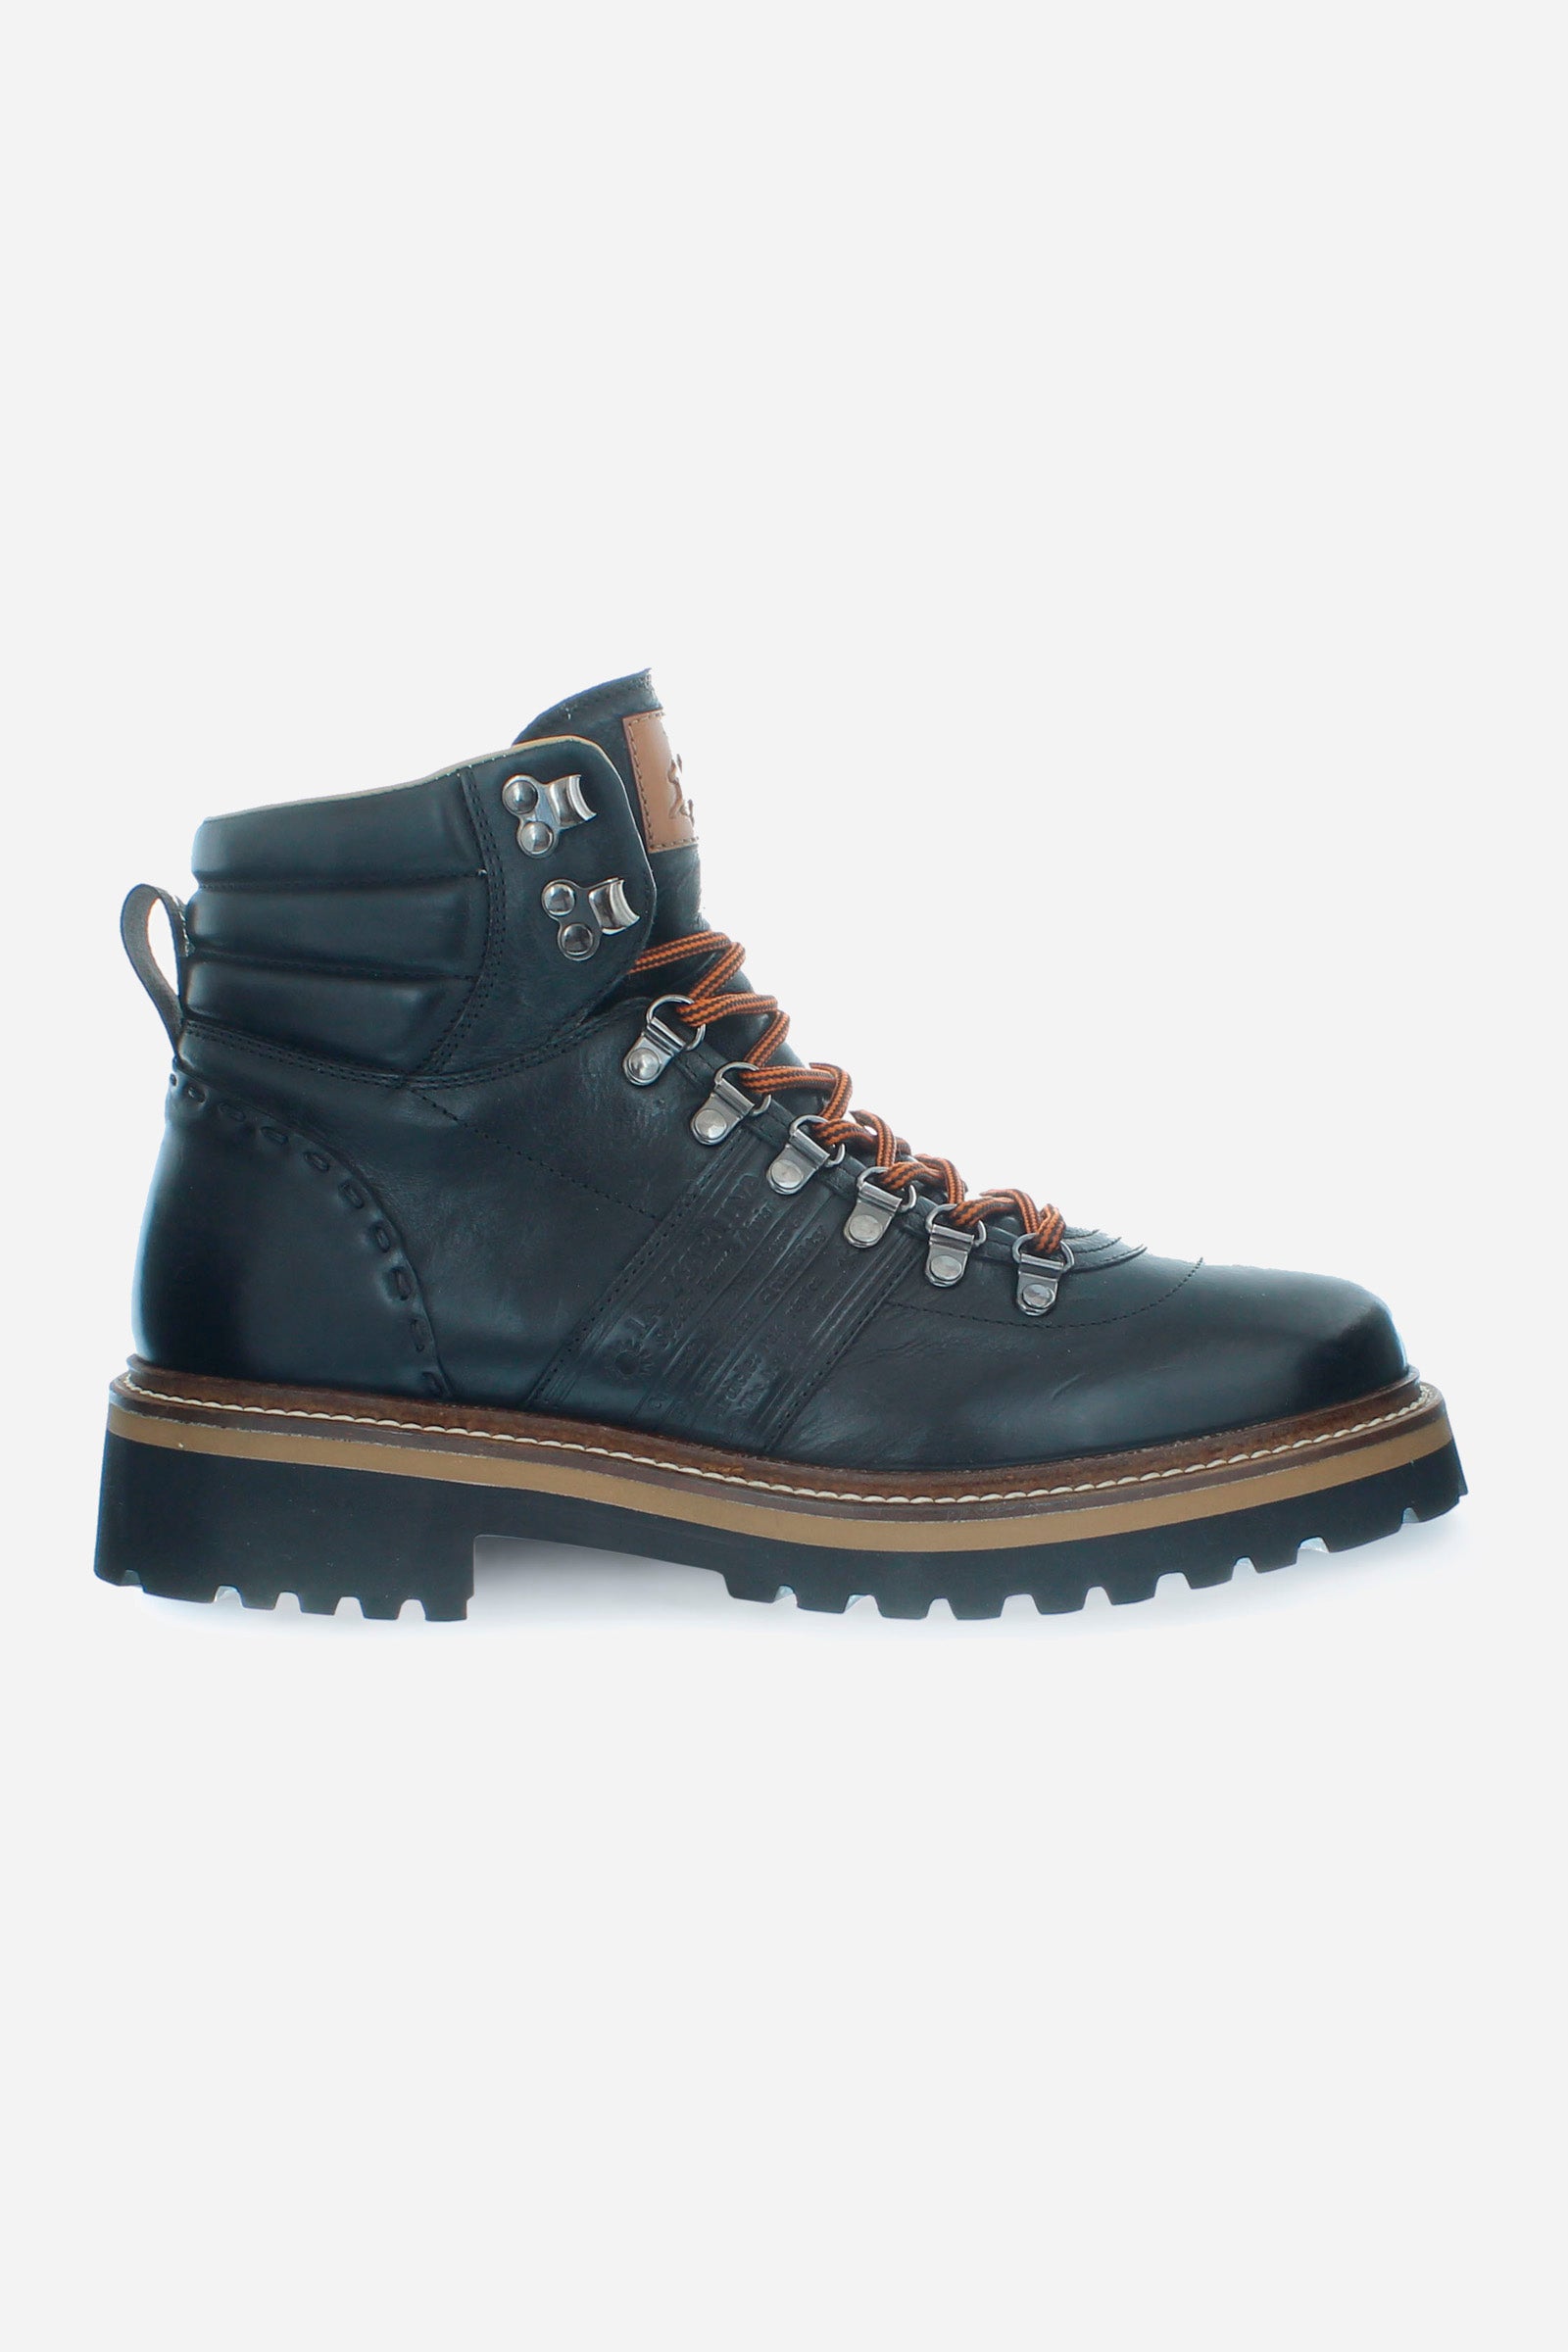 Men's urban style ankle boot in leather